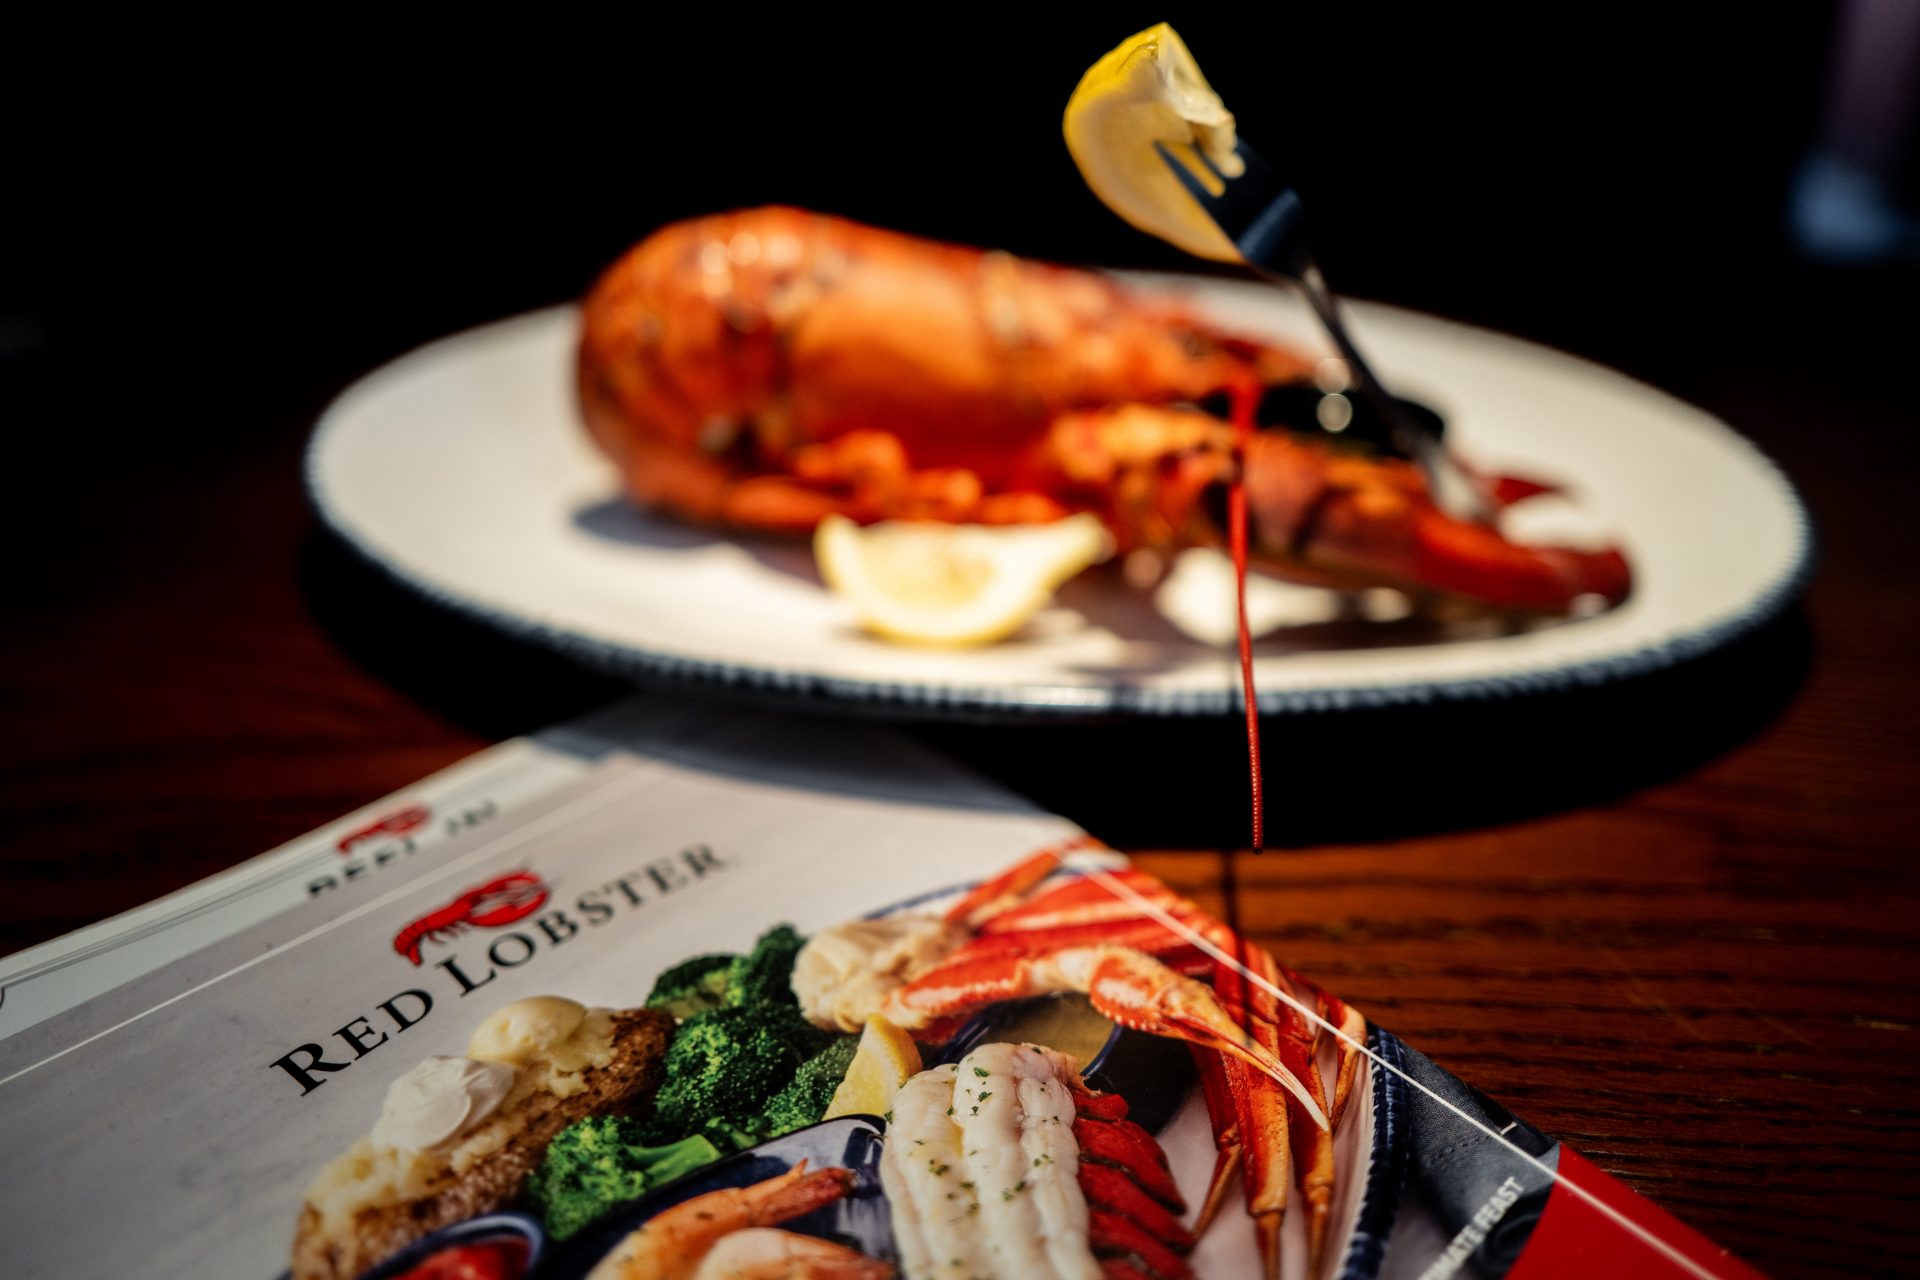 Why is Red Lobster filing for bankruptcy?